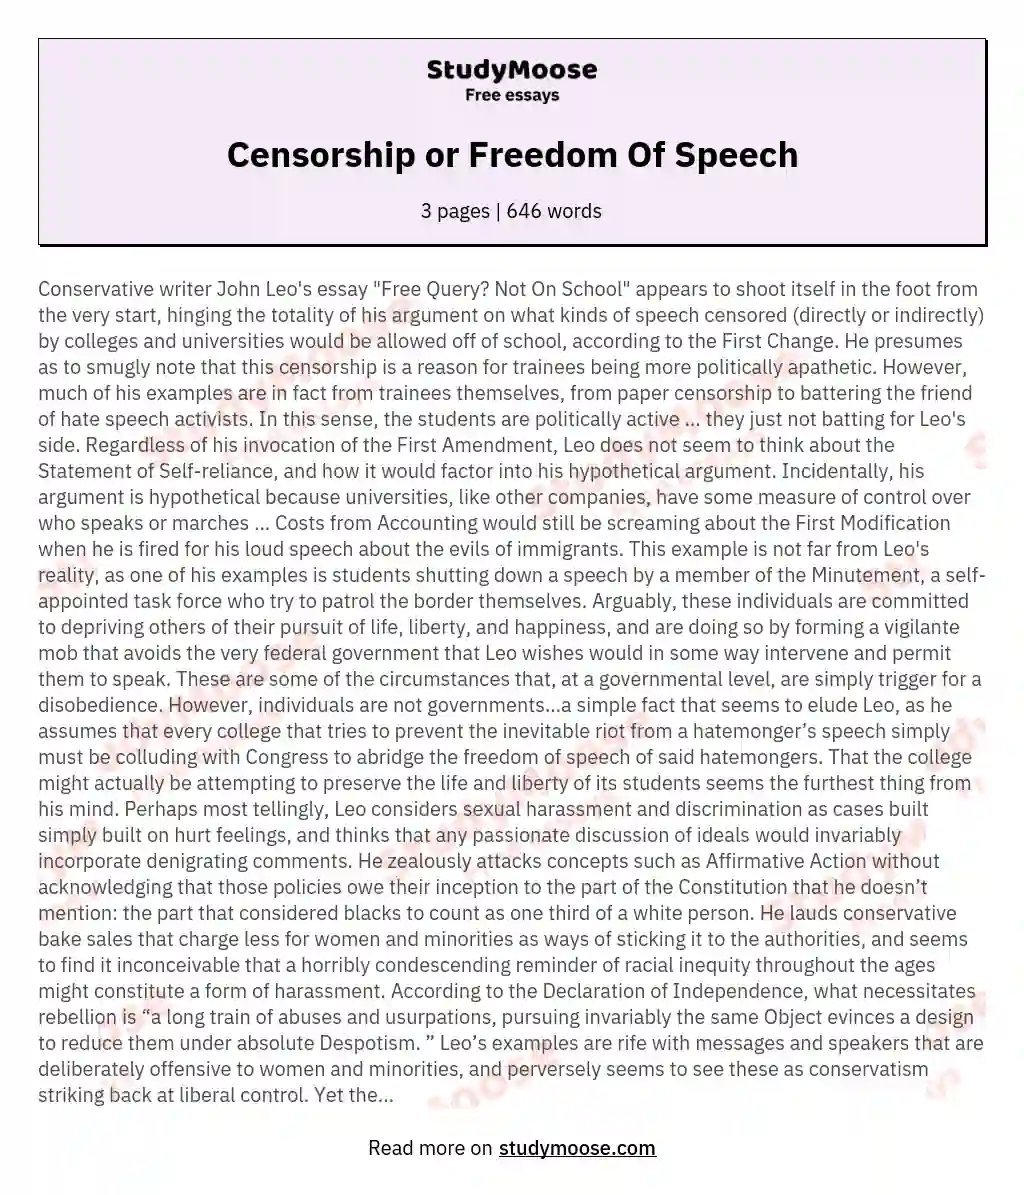 freedom of expression and censorship essay